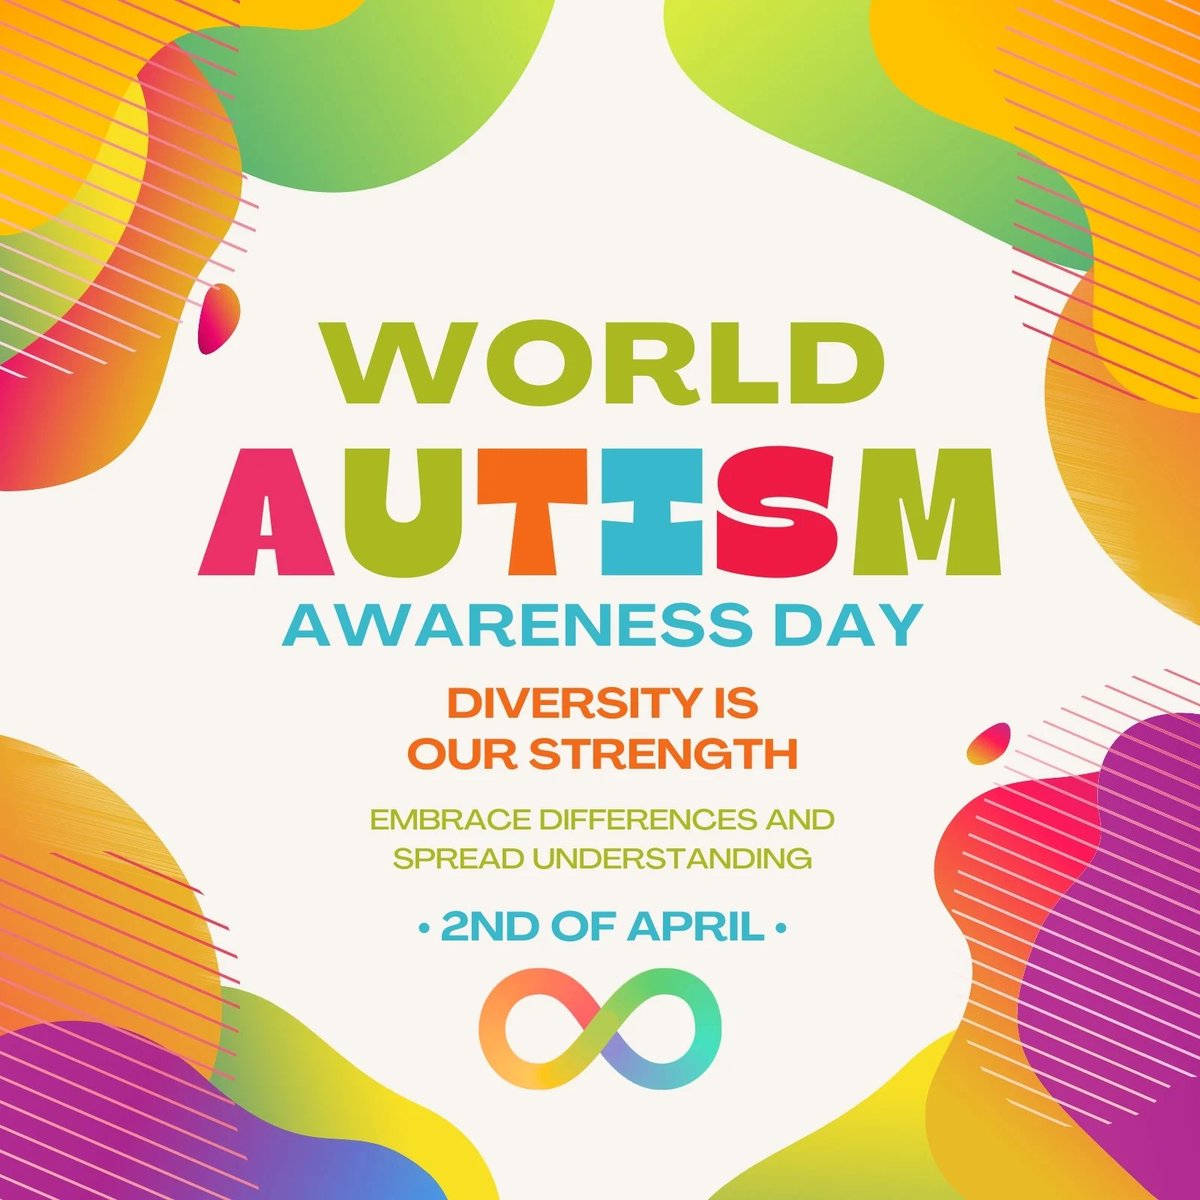 At CARE, we champion diversity and inclusiveness. Today, on World Autism Awareness Day, let's reaffirm our commitment to fostering an environment where everyone, including individuals with autism, feels valued and respected. #AutismAcceptance #InclusionMatters #CAREIntelSS